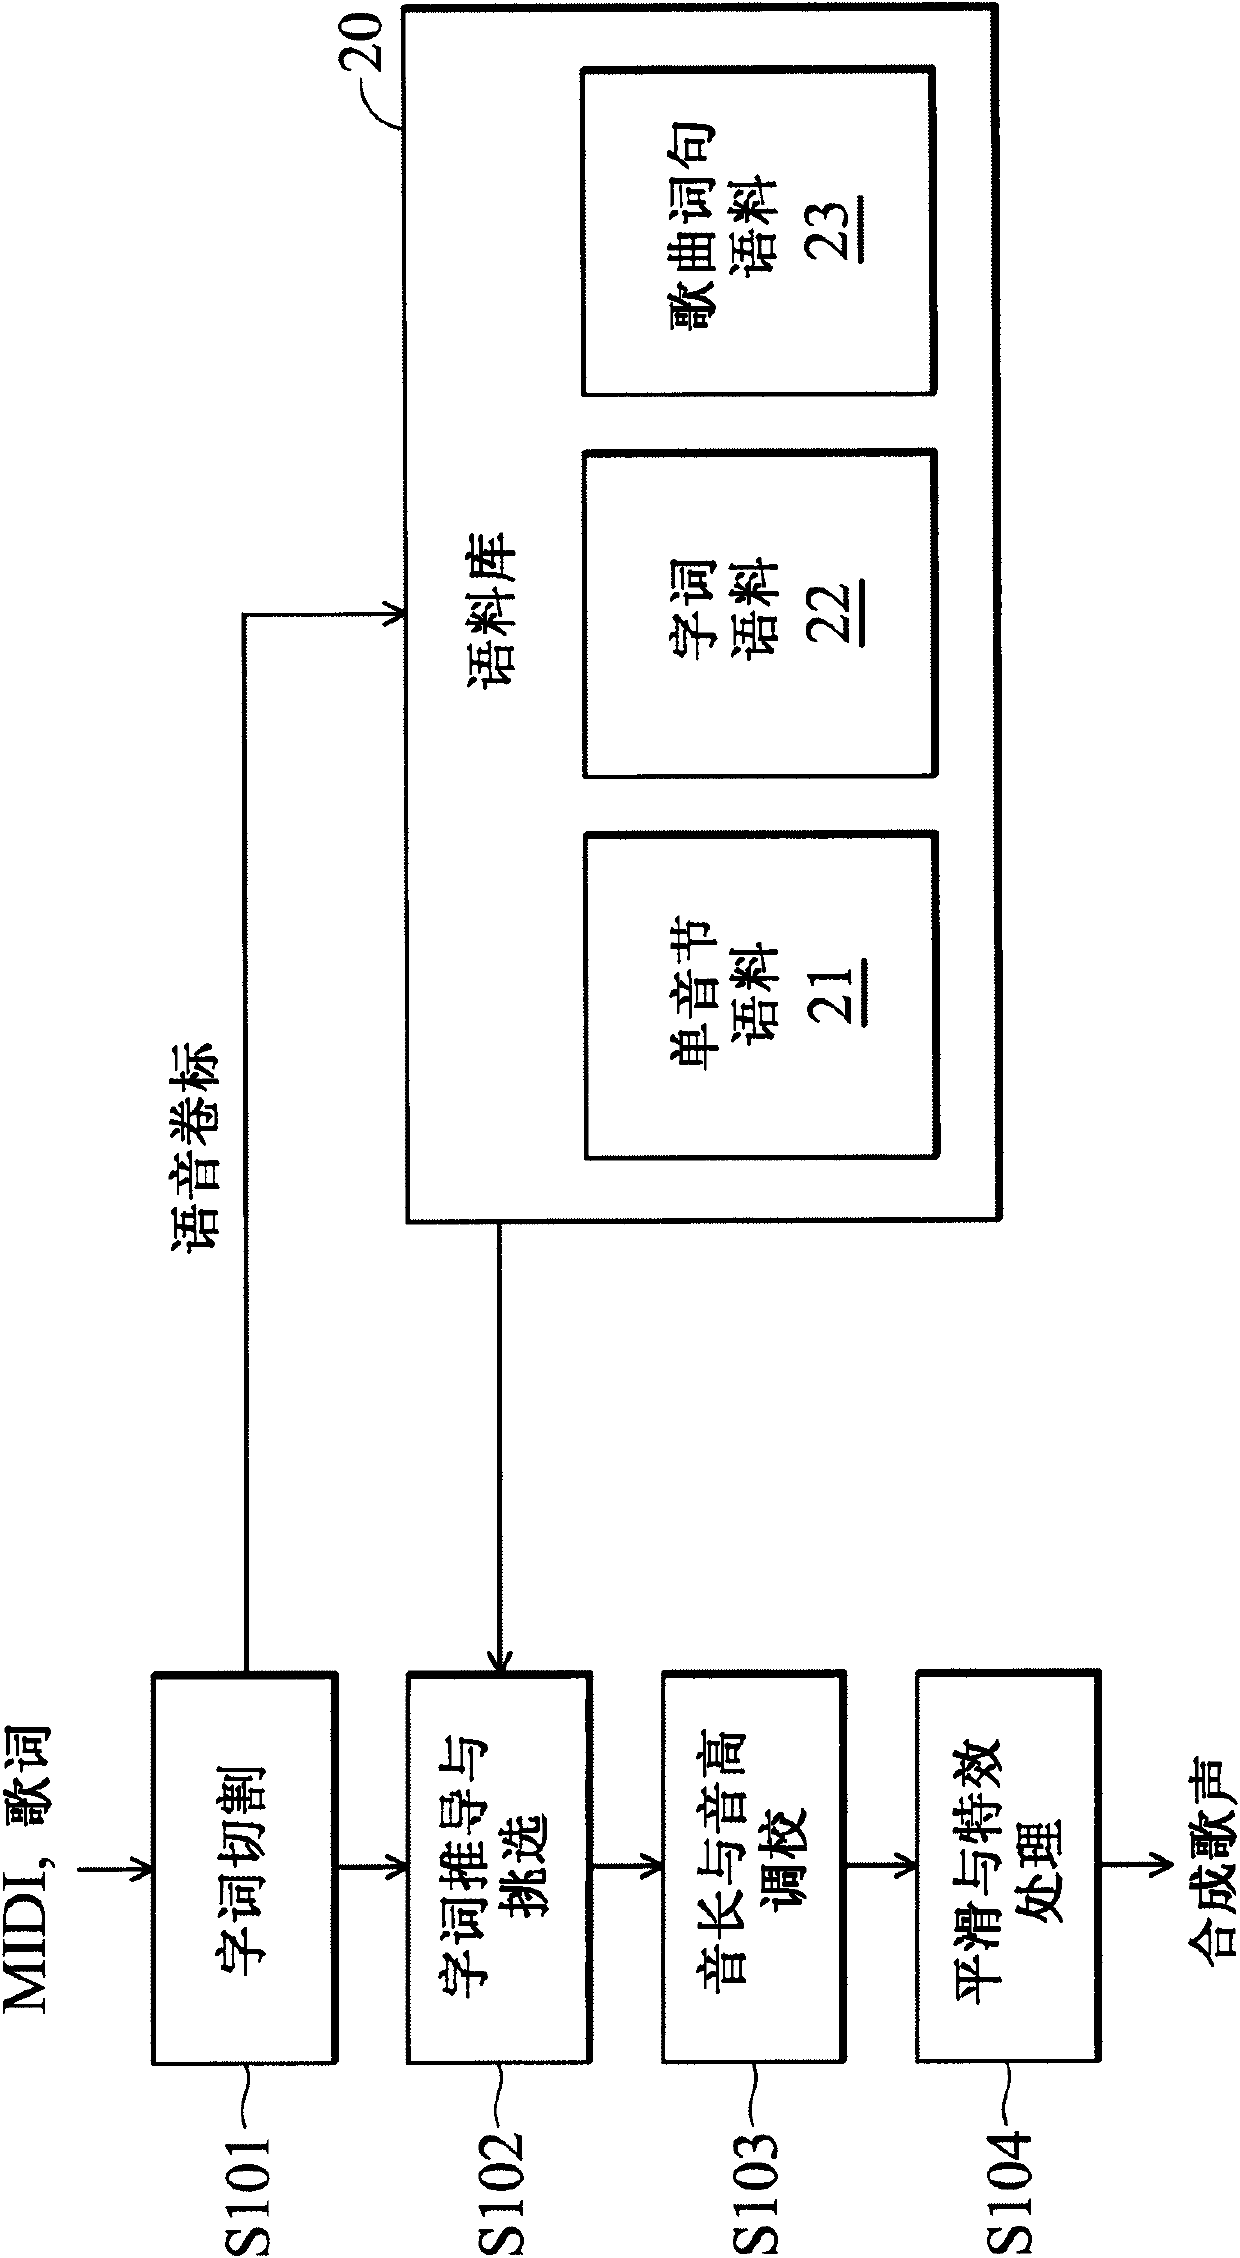 Singing sound synthesis system, method and device